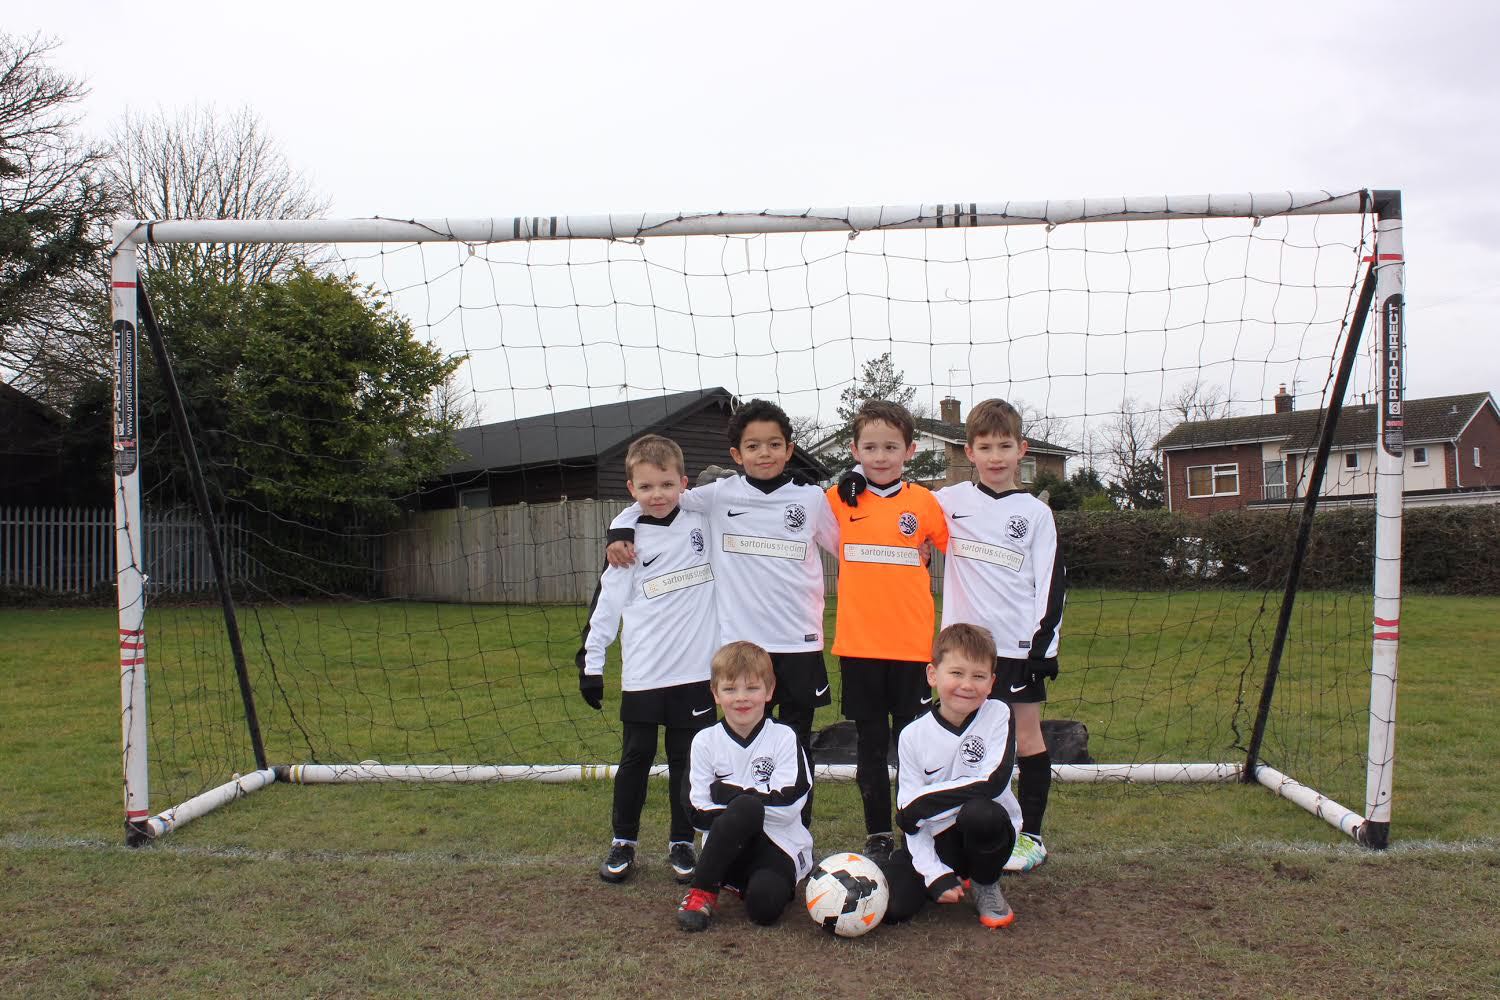 The under 7's